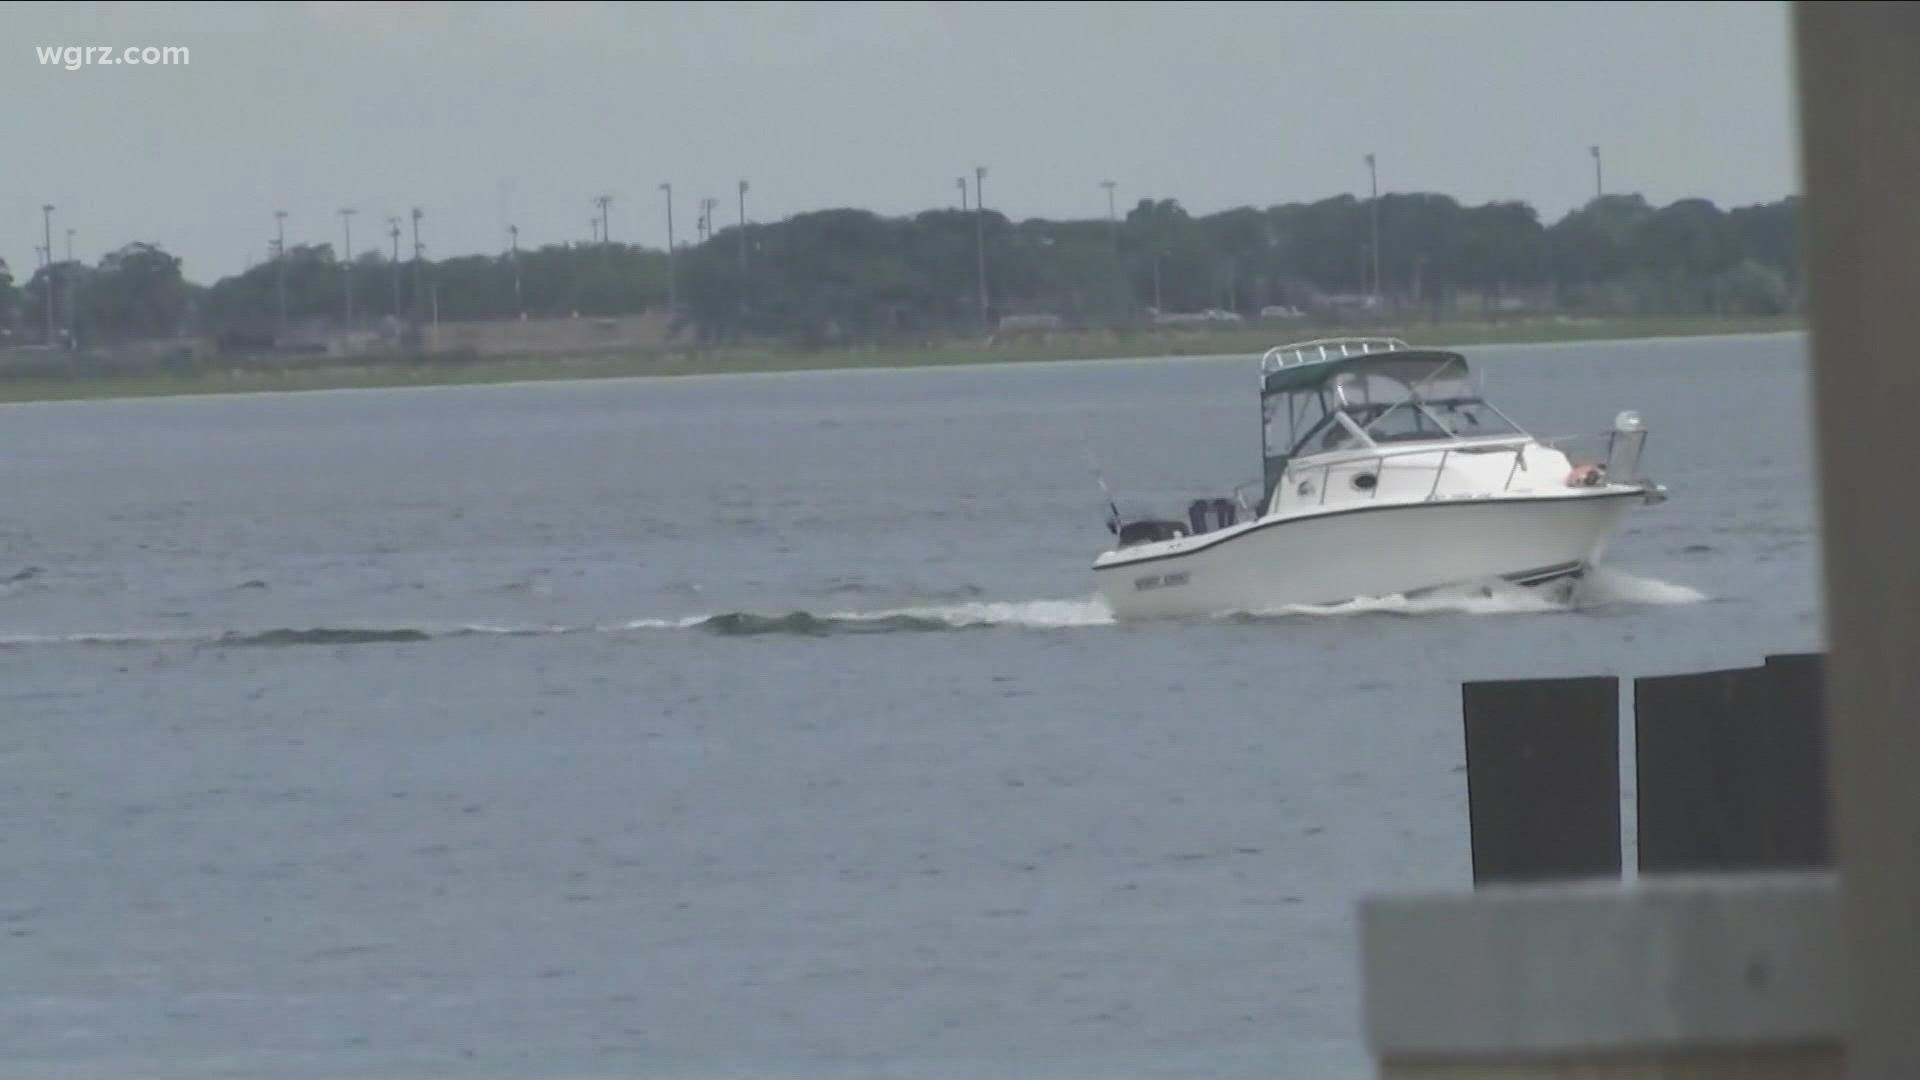 The Erie County Sheriff's Office marine unit has started patrolling along the almost 90 miles of the coastline.